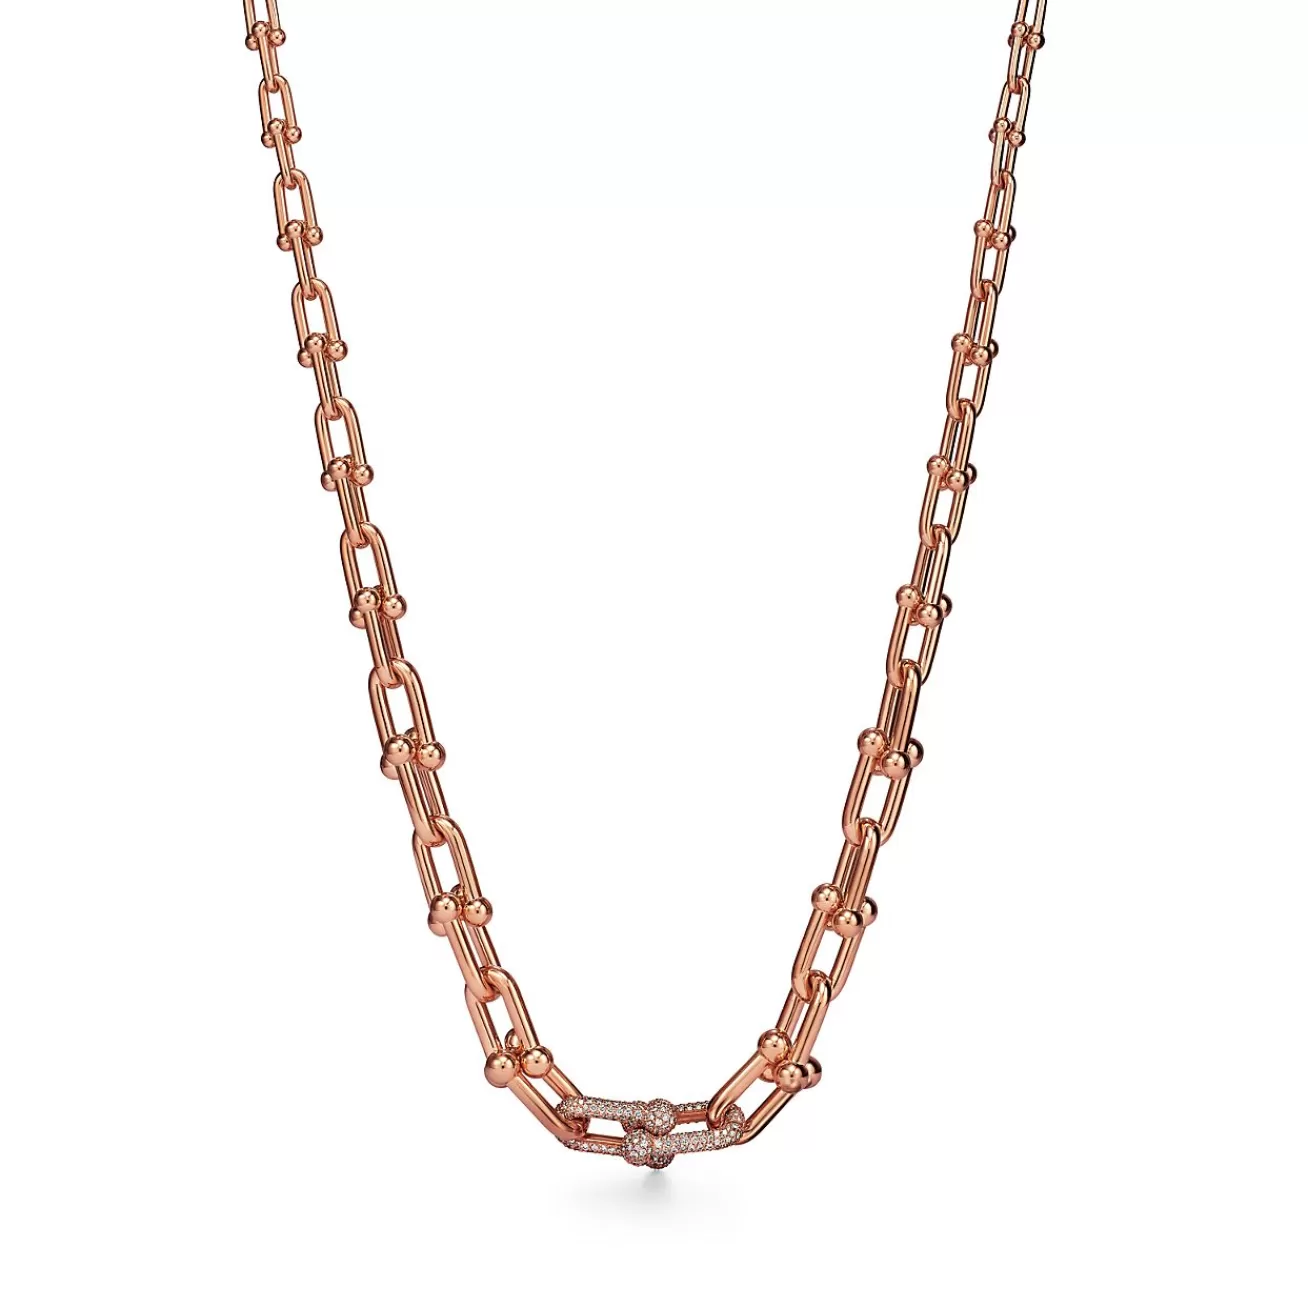 Tiffany & Co. Tiffany HardWear Graduated Link Necklace in Rose Gold with Pavé Diamonds | ^ Necklaces & Pendants | Men's Jewelry